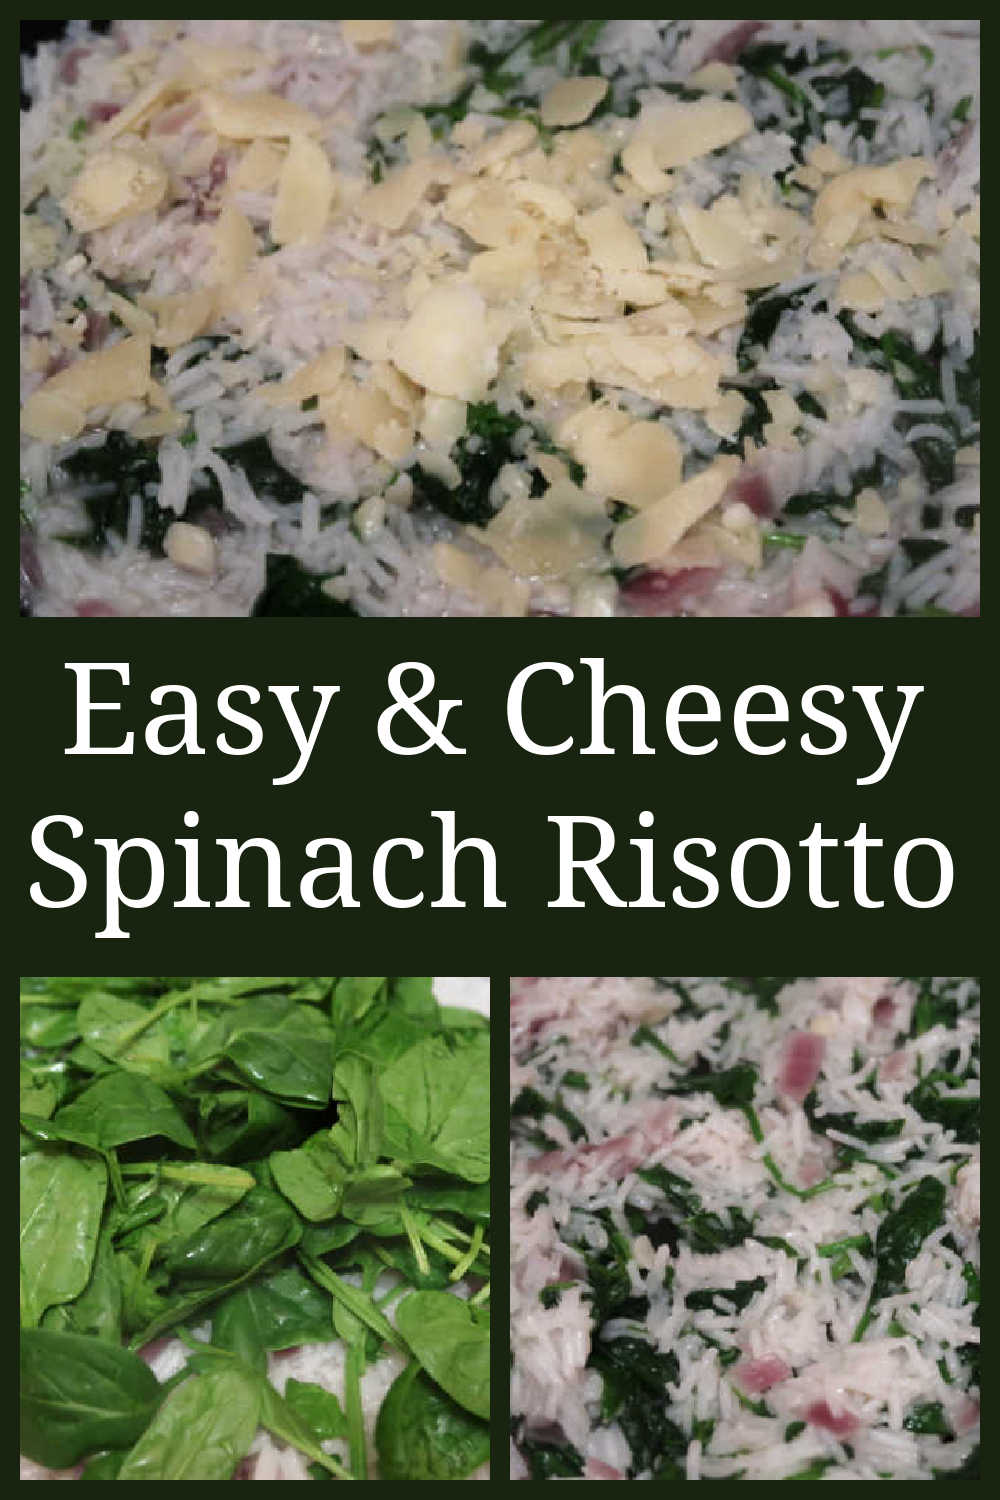 Spinach Risotto Recipe - How to make a quick & easy cheap cheesy vegetarian meal with parmesan cheese - budget rice dinner recipes with the video.